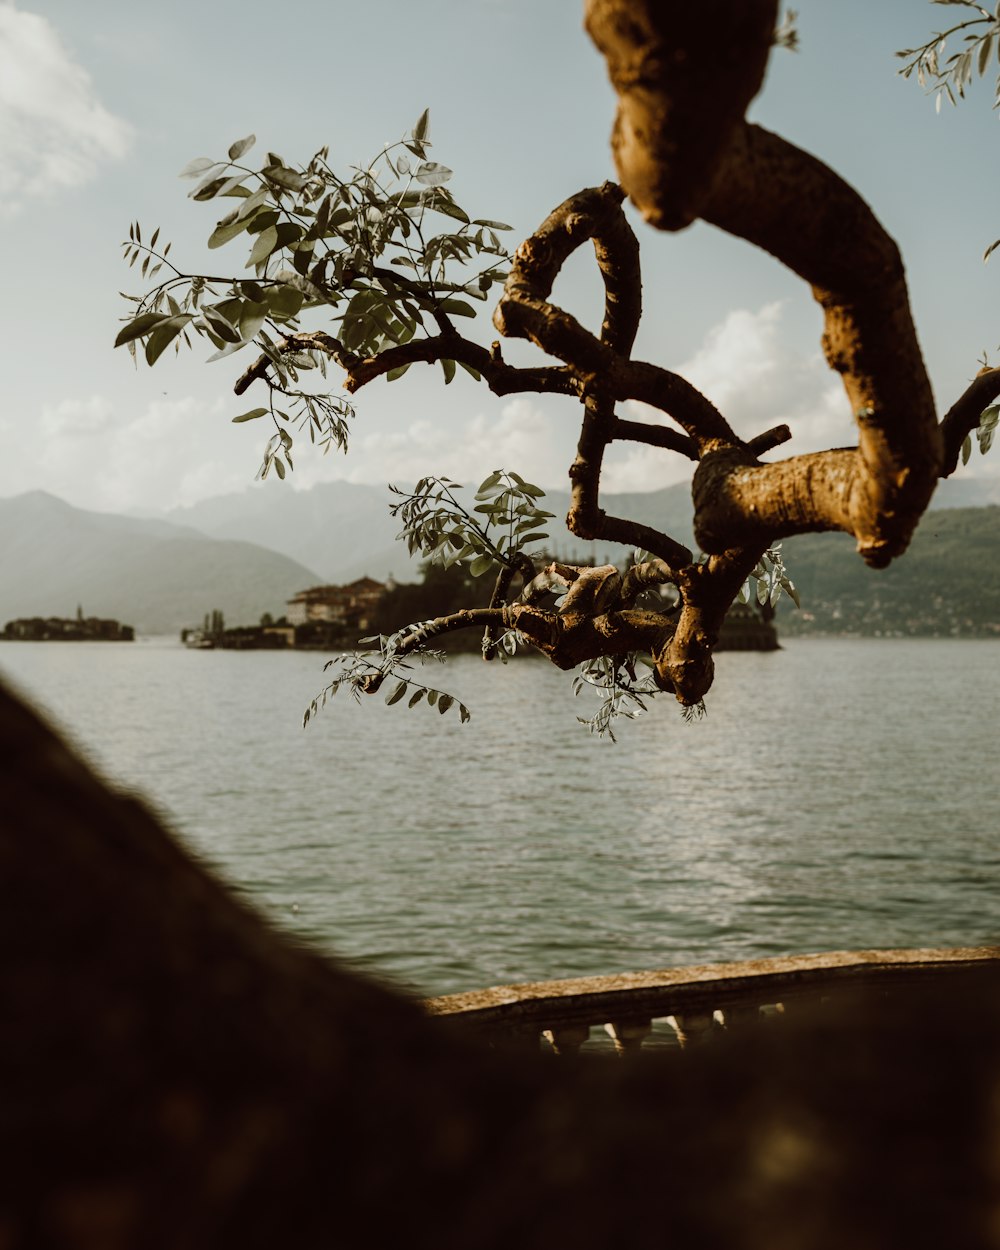 a tree branch hanging over a body of water